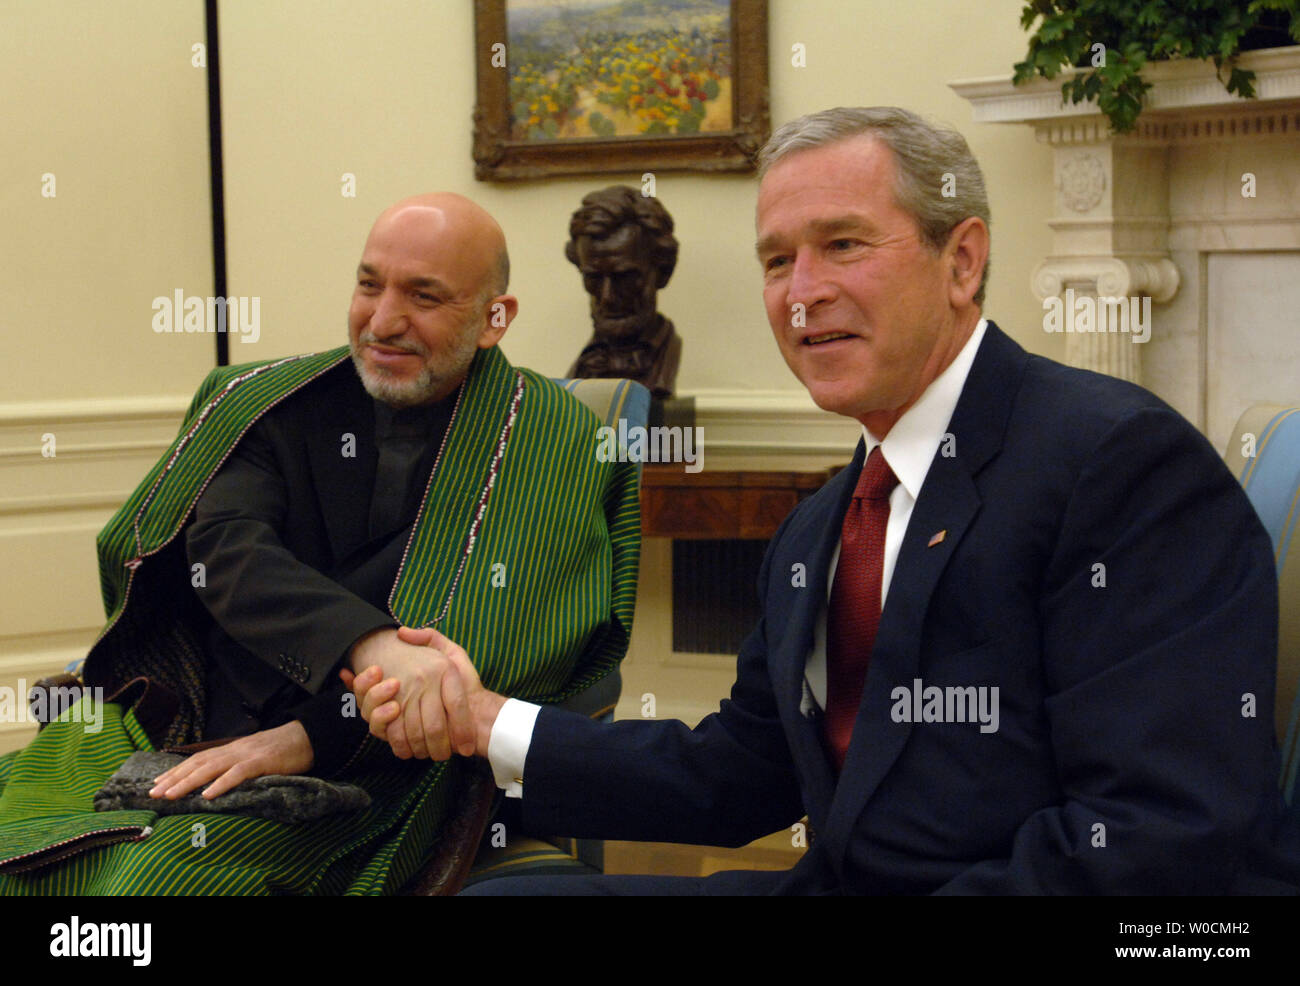 Afghan President Hamid Karzai, left, is welcomed to the oval office by President George W. Bush, on May 23, 2005 in Washington.  Bush and Karzai talked about prisoner abuse, drug production and the war in Iraq.  (UPI Photo/Michael Kleinfeld) Stock Photo